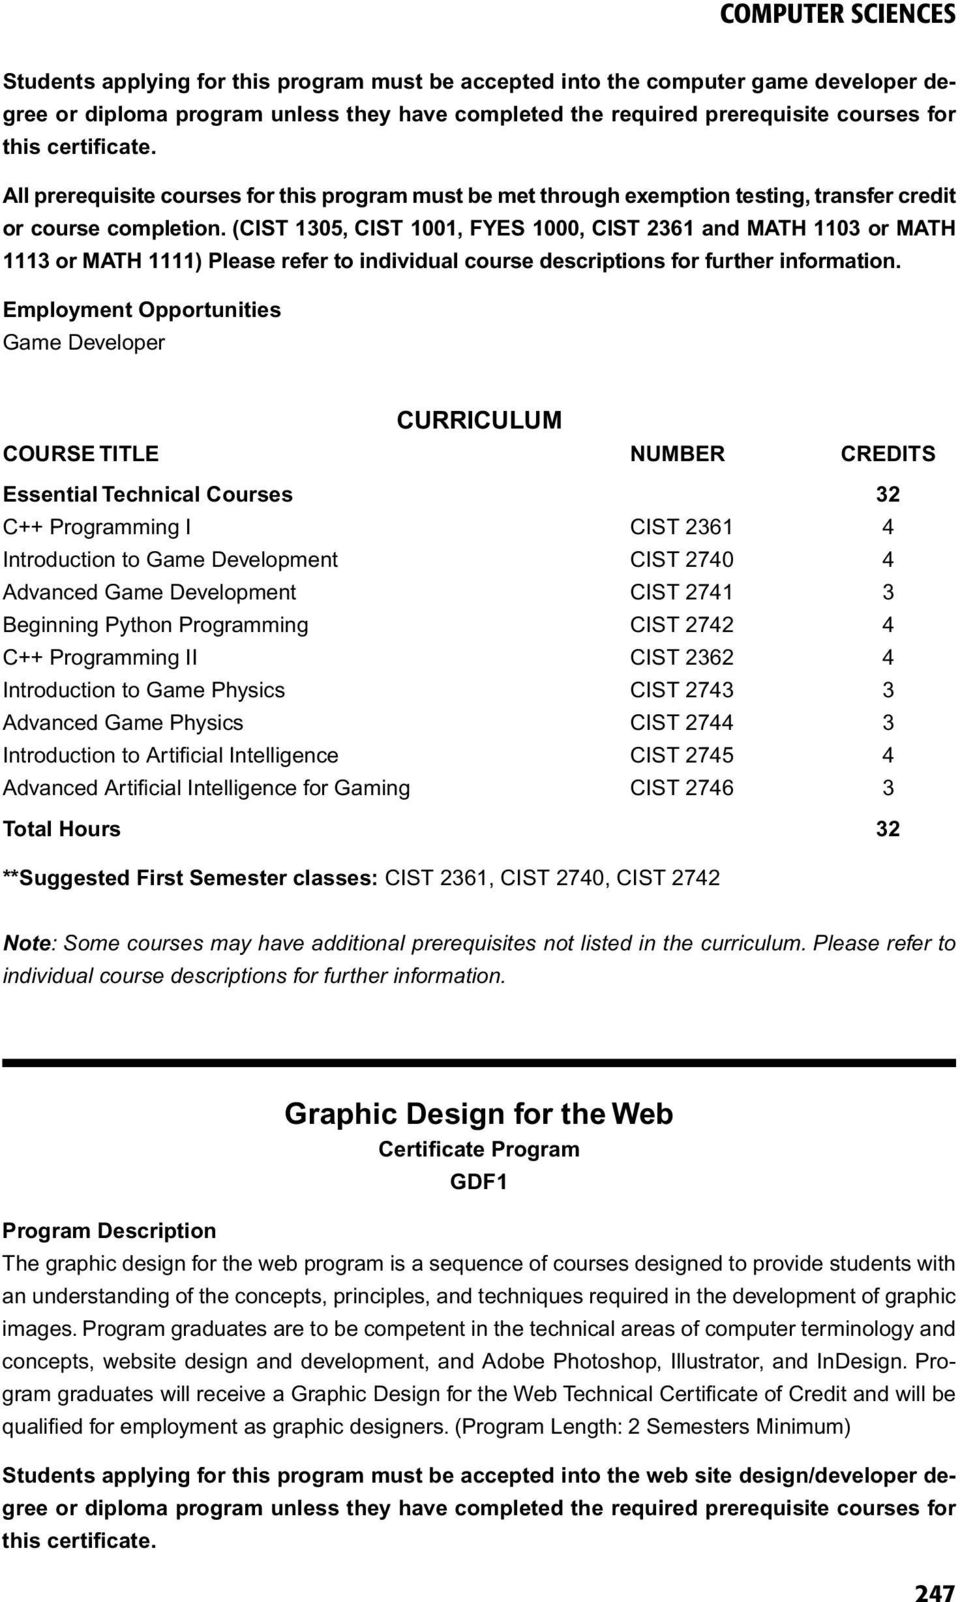 (CIST 1305, CIST 1001, FYES 1000, CIST 2361 and MATH 1103 or MATH 1113 or MATH 1111) Please refer to Game Developer Essential Technical Courses 32 C++ Programming I CIST 2361 4 Introduction to Game